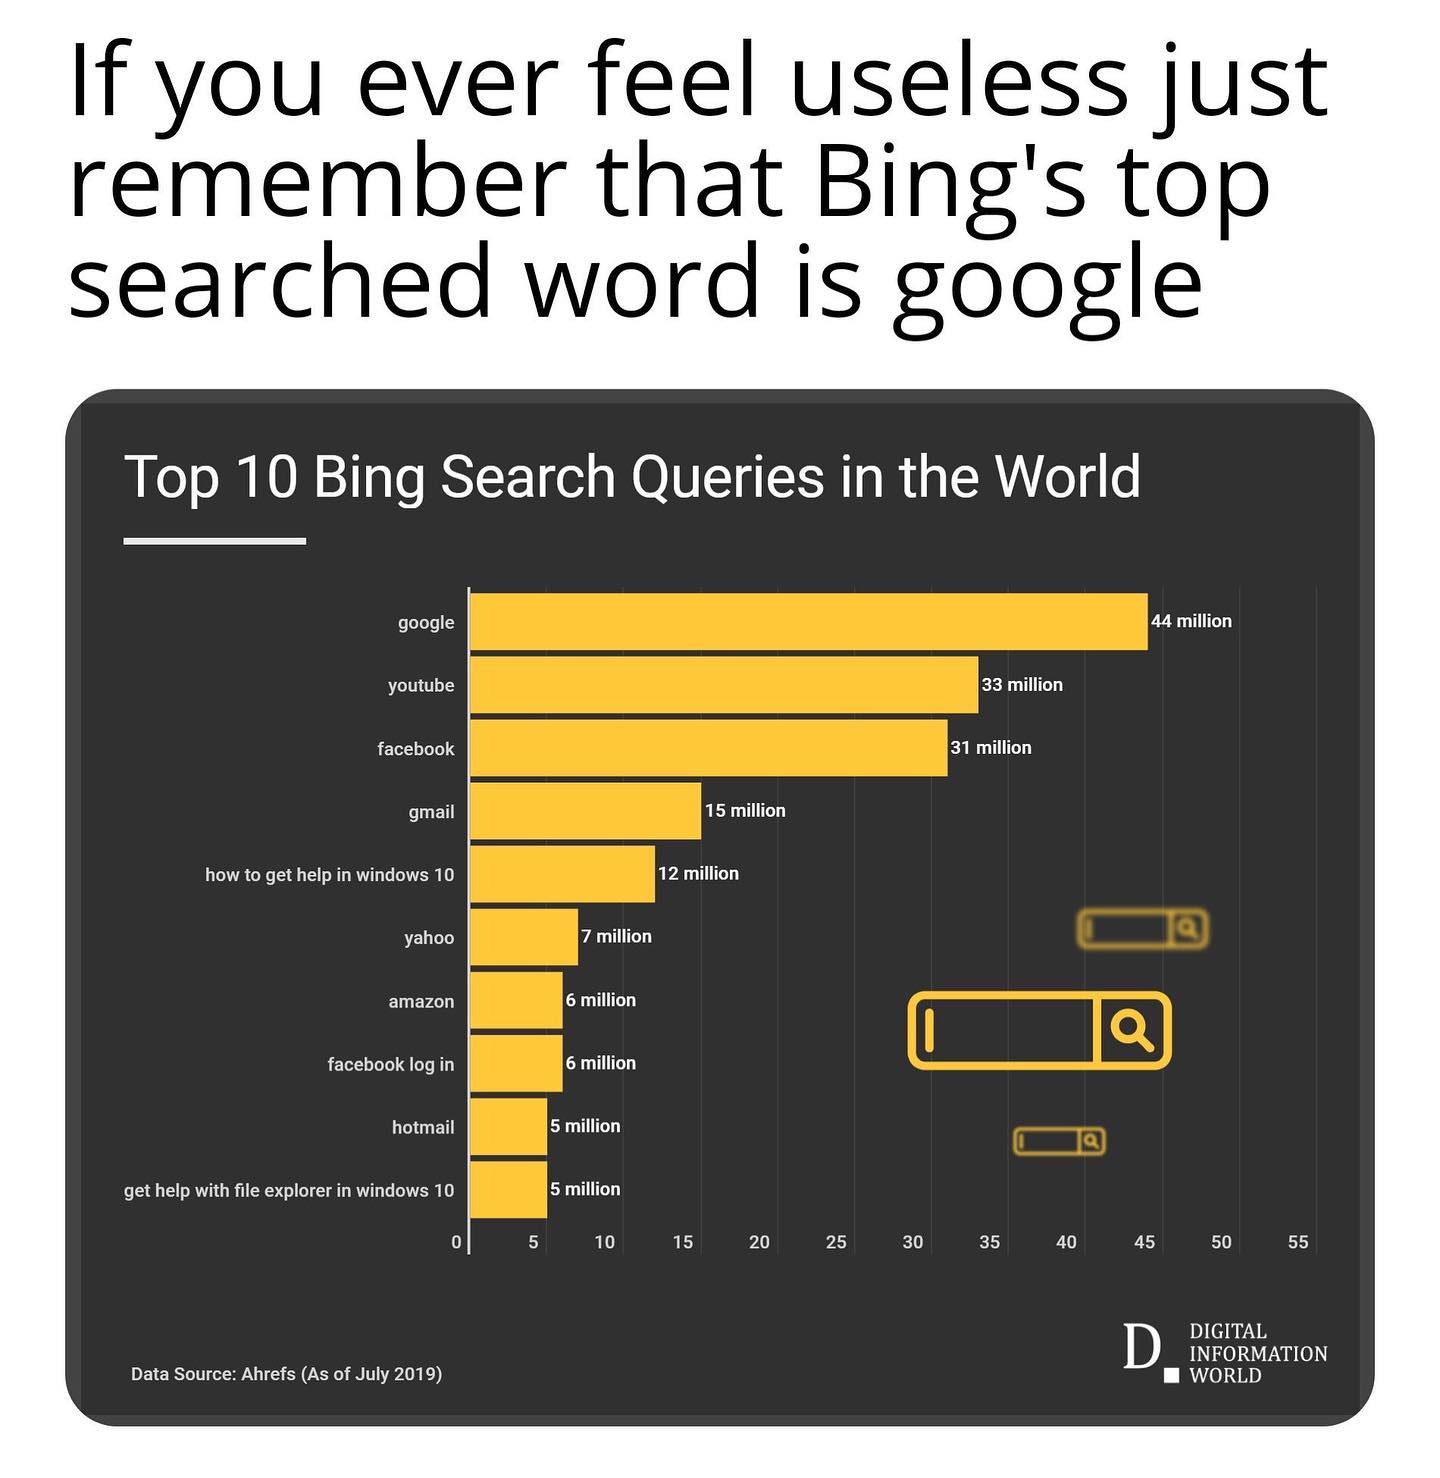 dank memes - most popular searches - If you ever feel useless just remember that Bing's top searched word is google Top 10 Bing Search Queries in the World google 44 million youtube 33 million facebook 31 million gmail 15 million how to get help in window